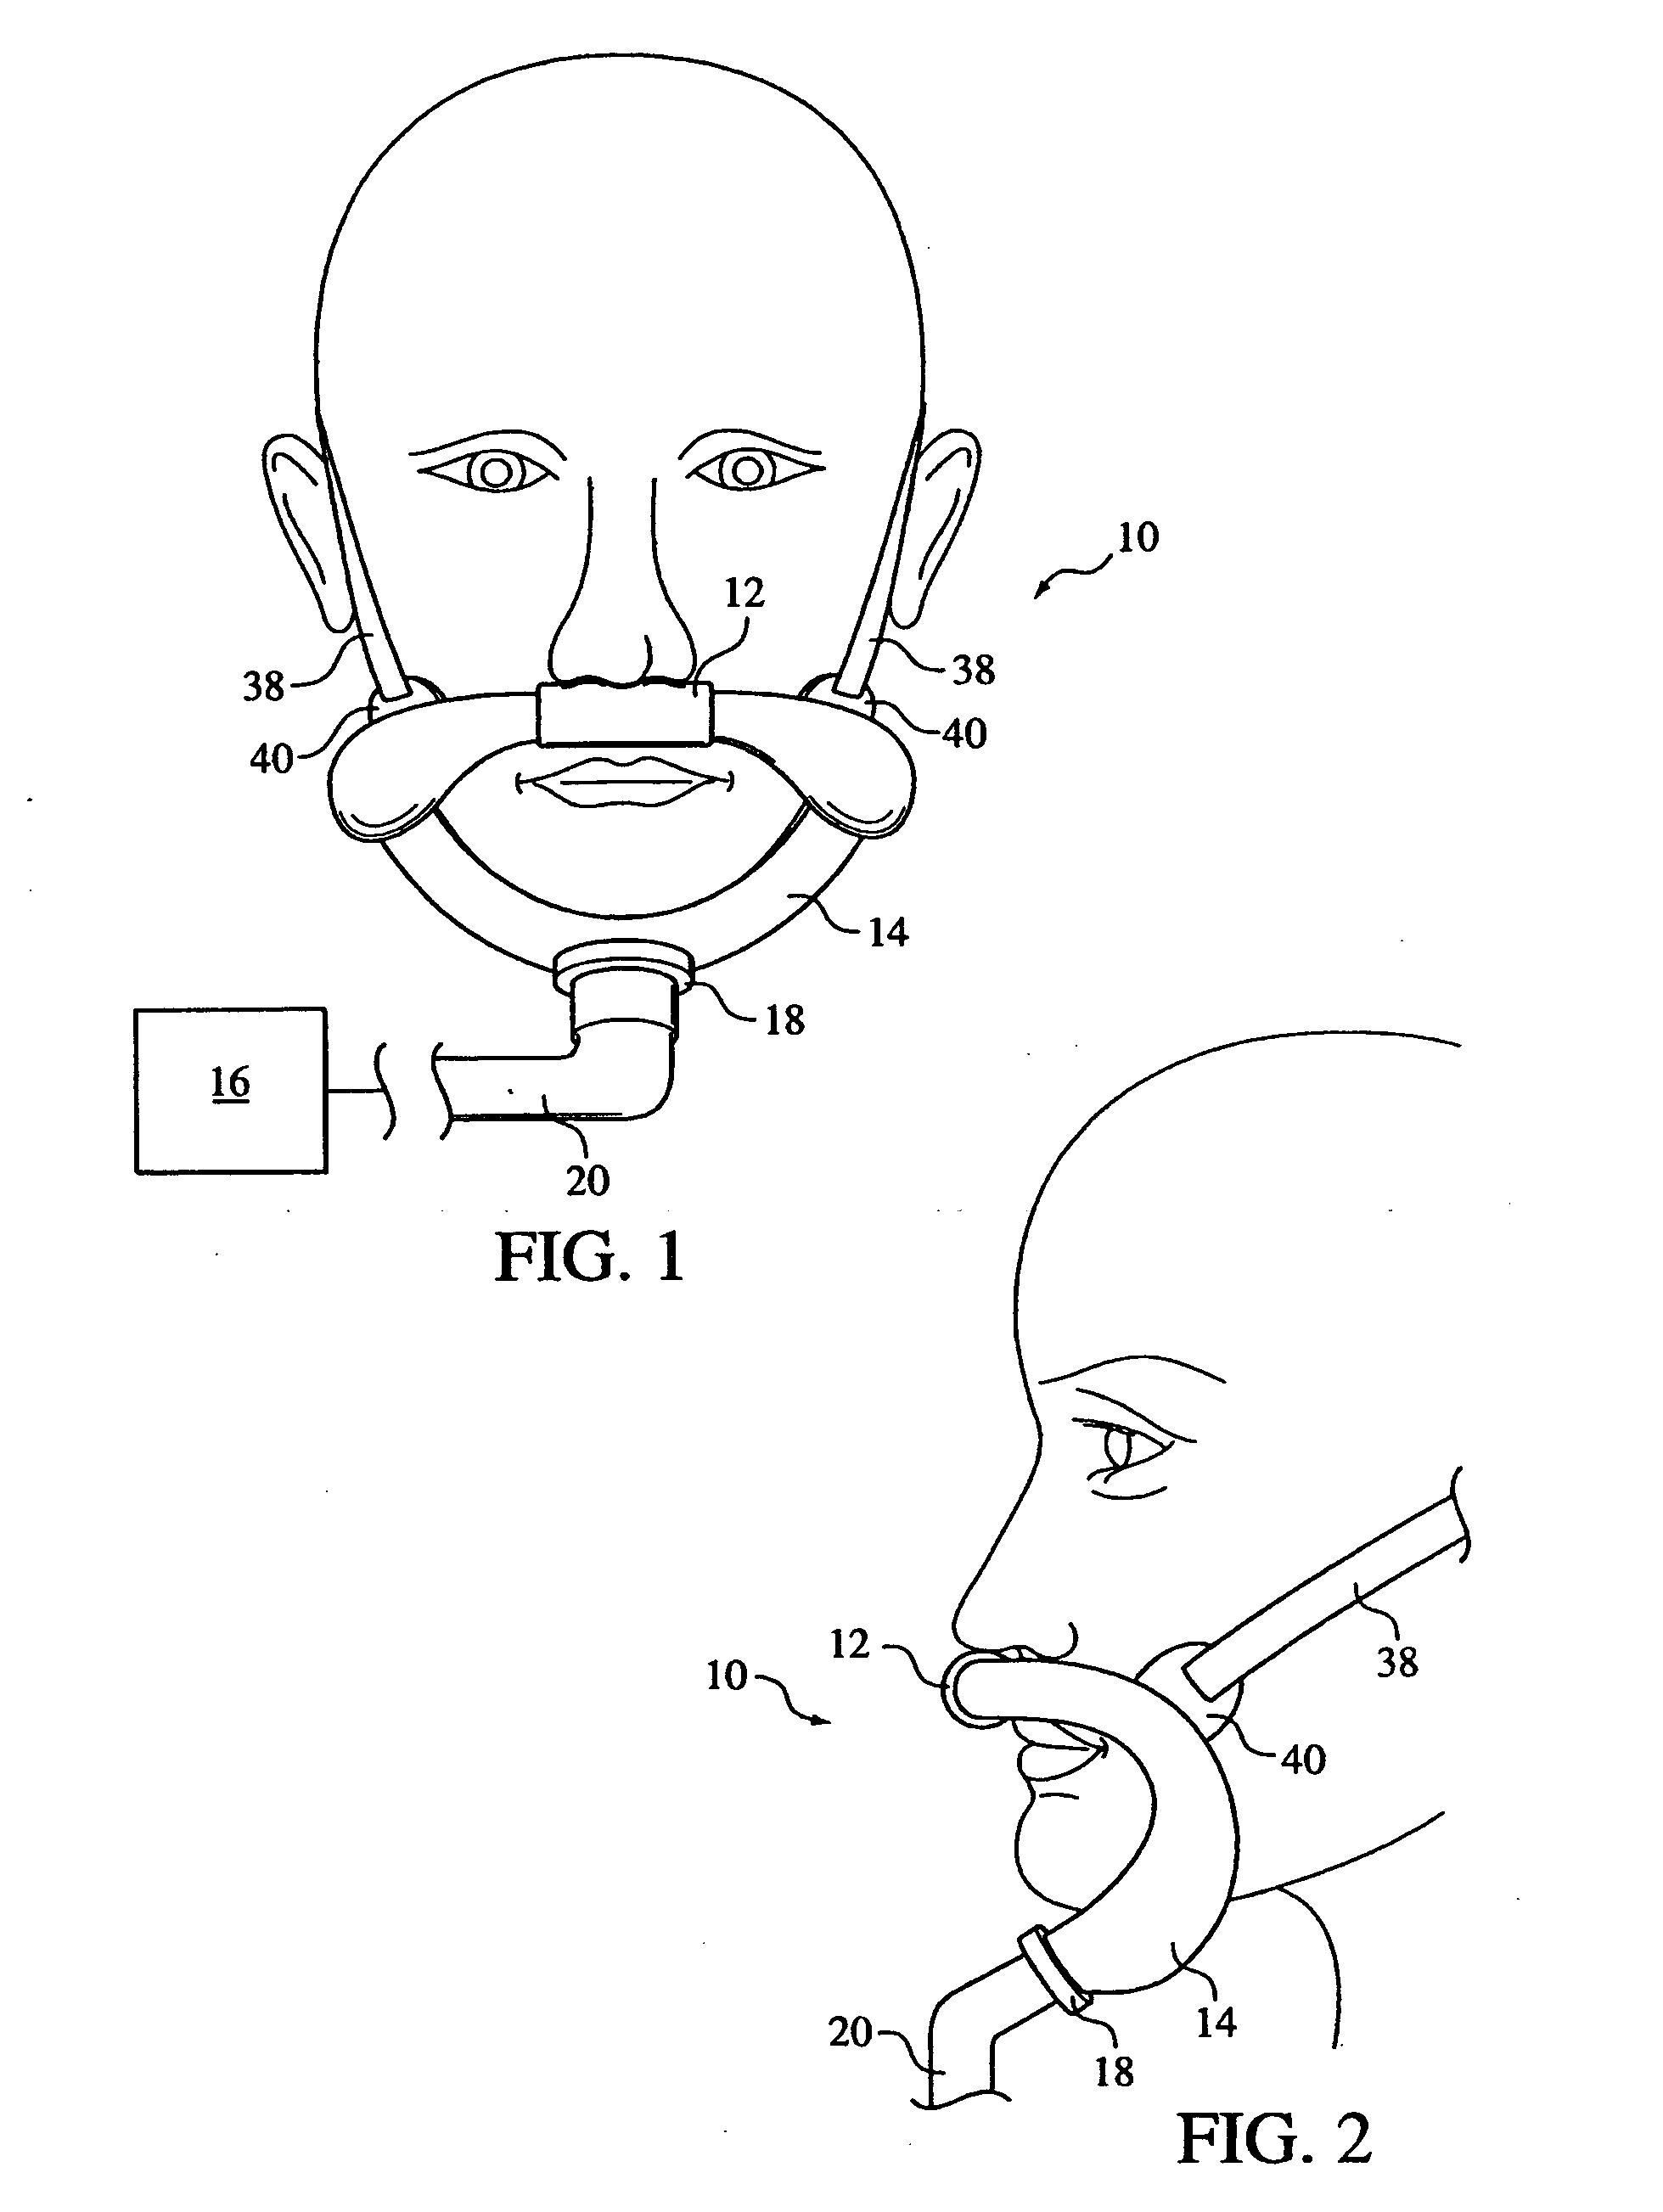 Patient intreface assembly supported under the mandible